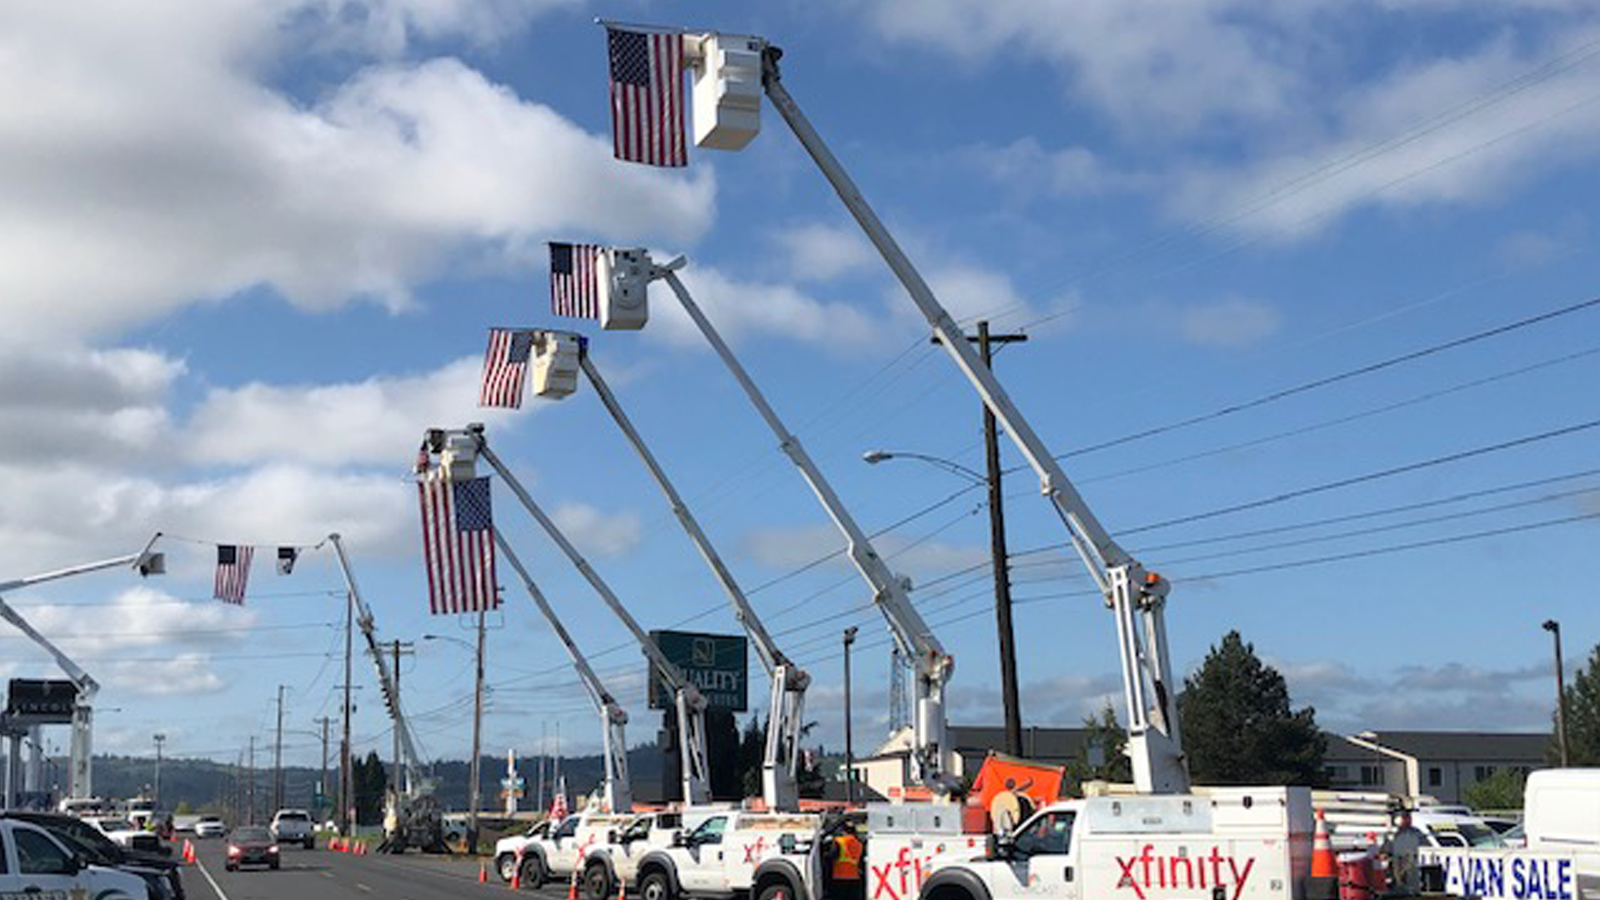 A series of Xfinity trucks with their cranes extended. Hanging from each crane is an American flag,